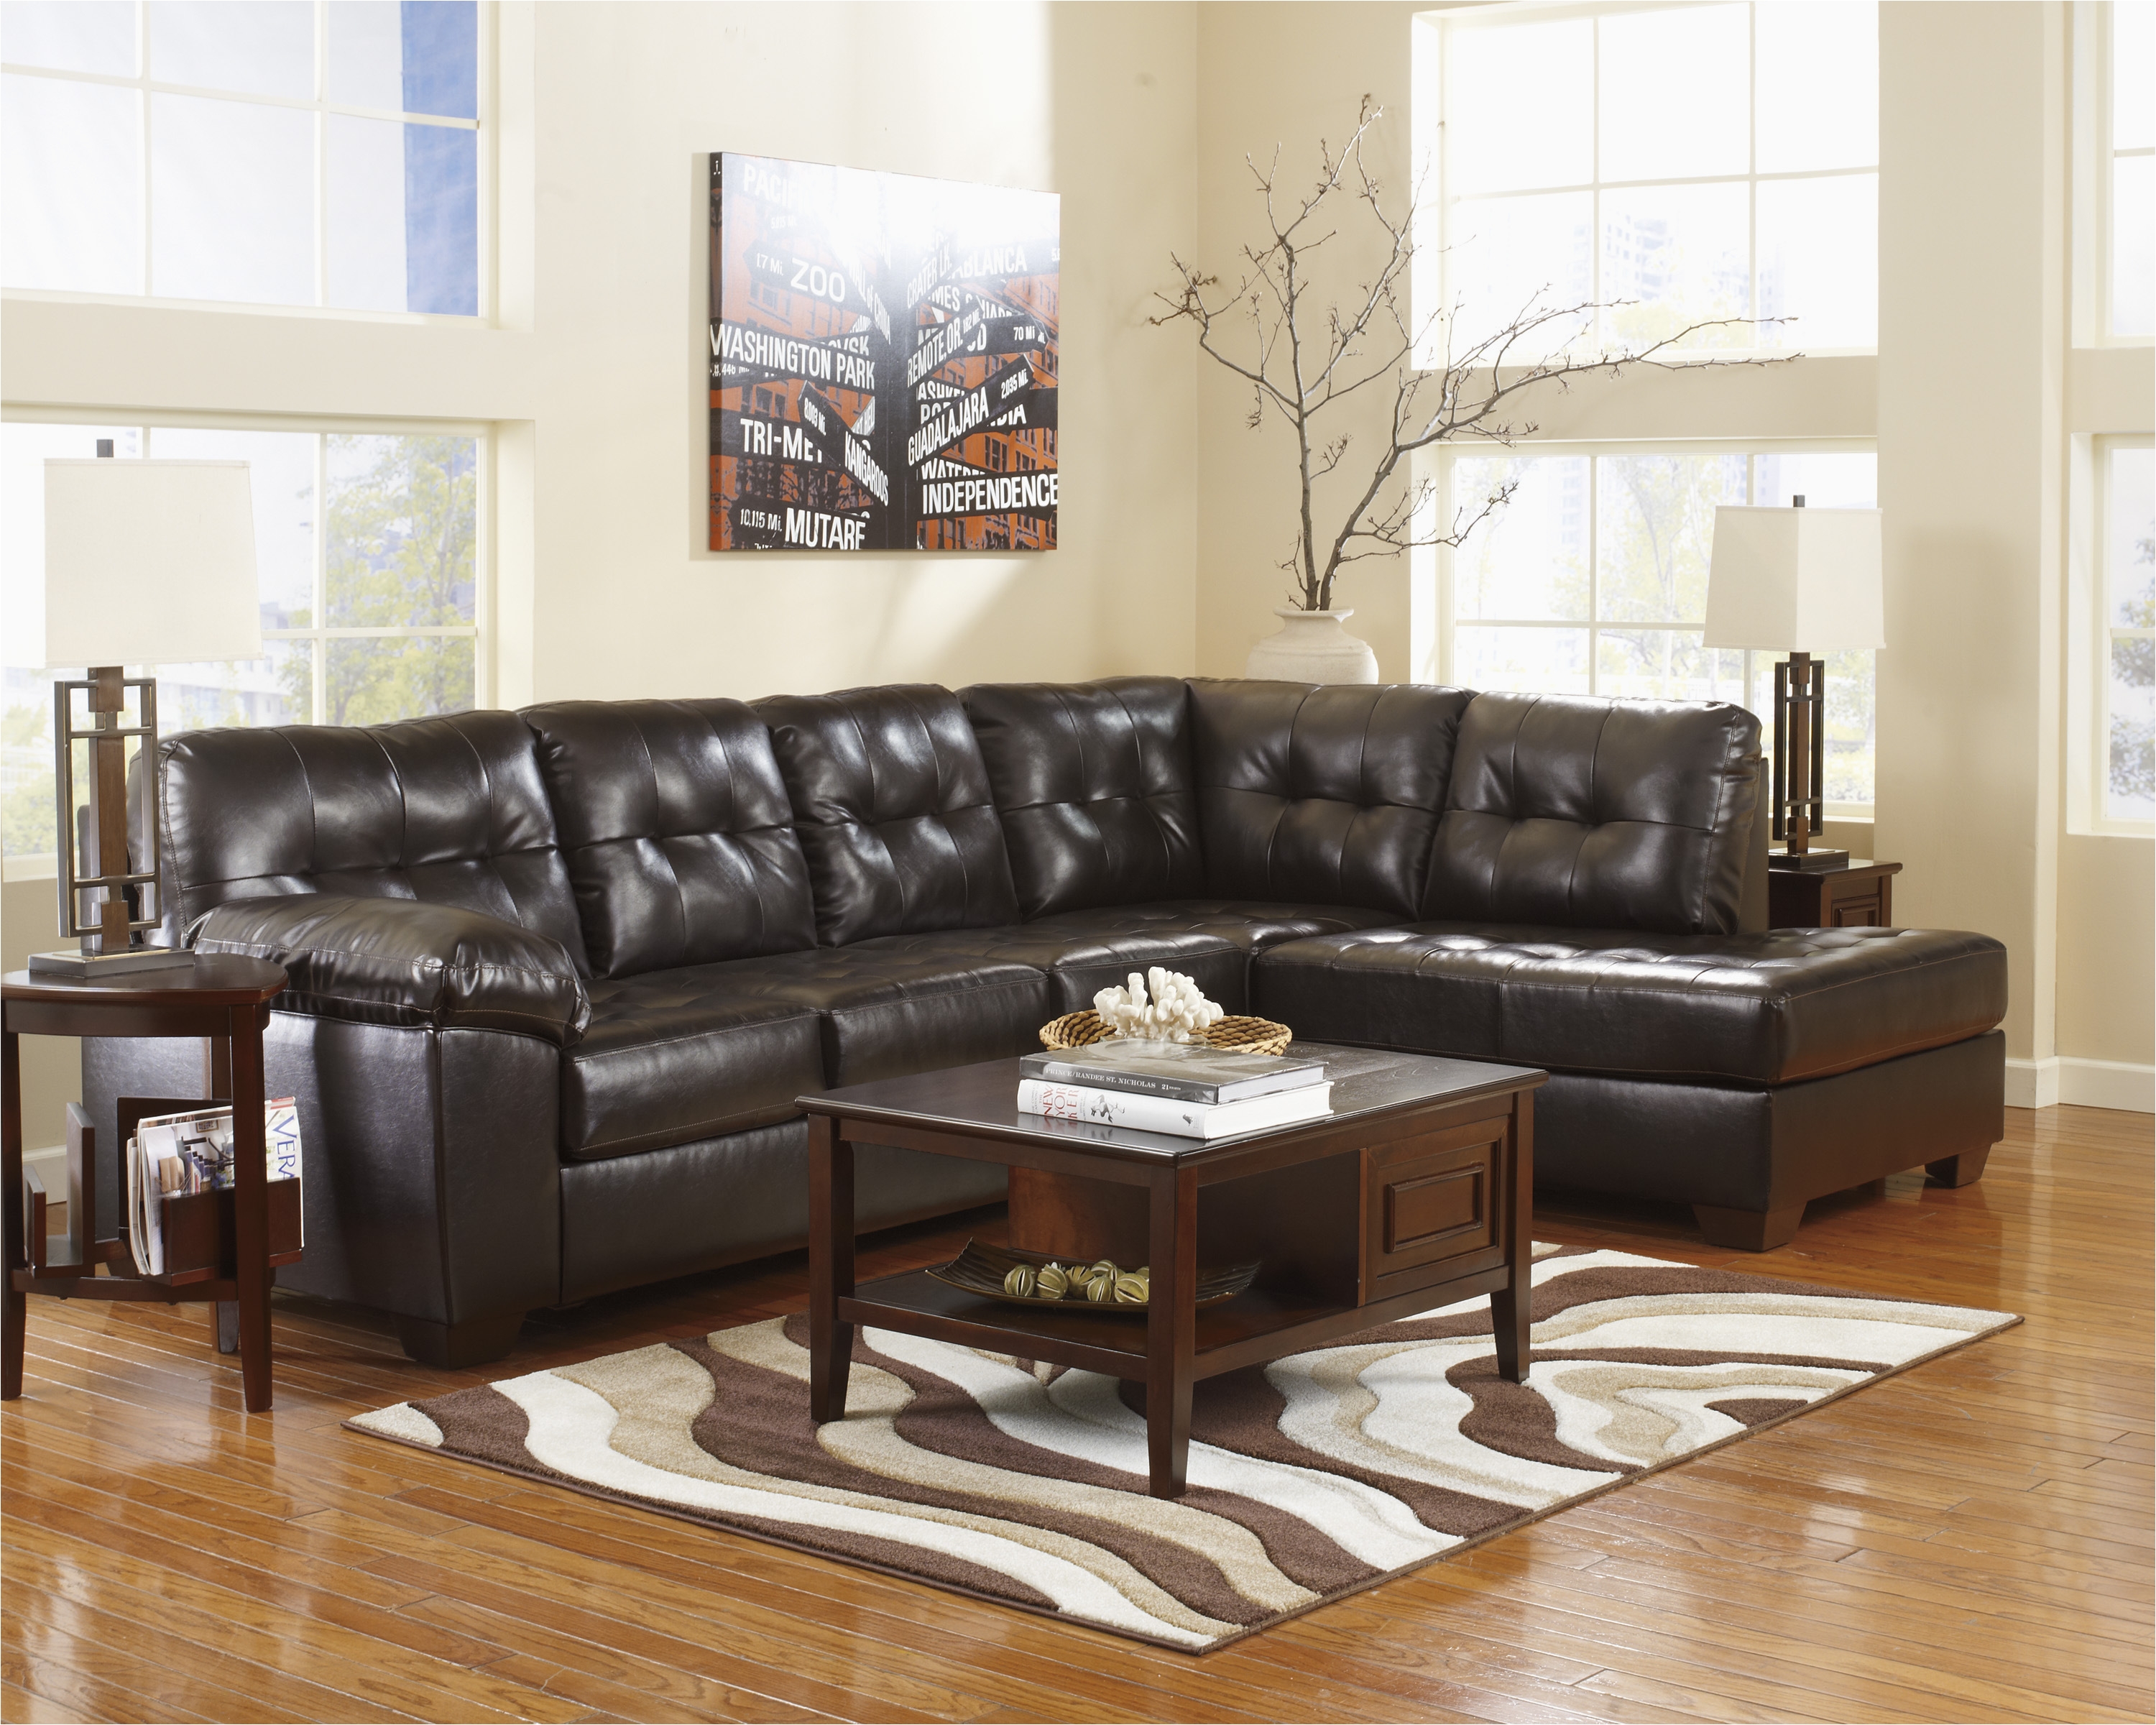 ashley furniture brown couch fresh ashley furniture coffee table with storage table ideas image of ashley